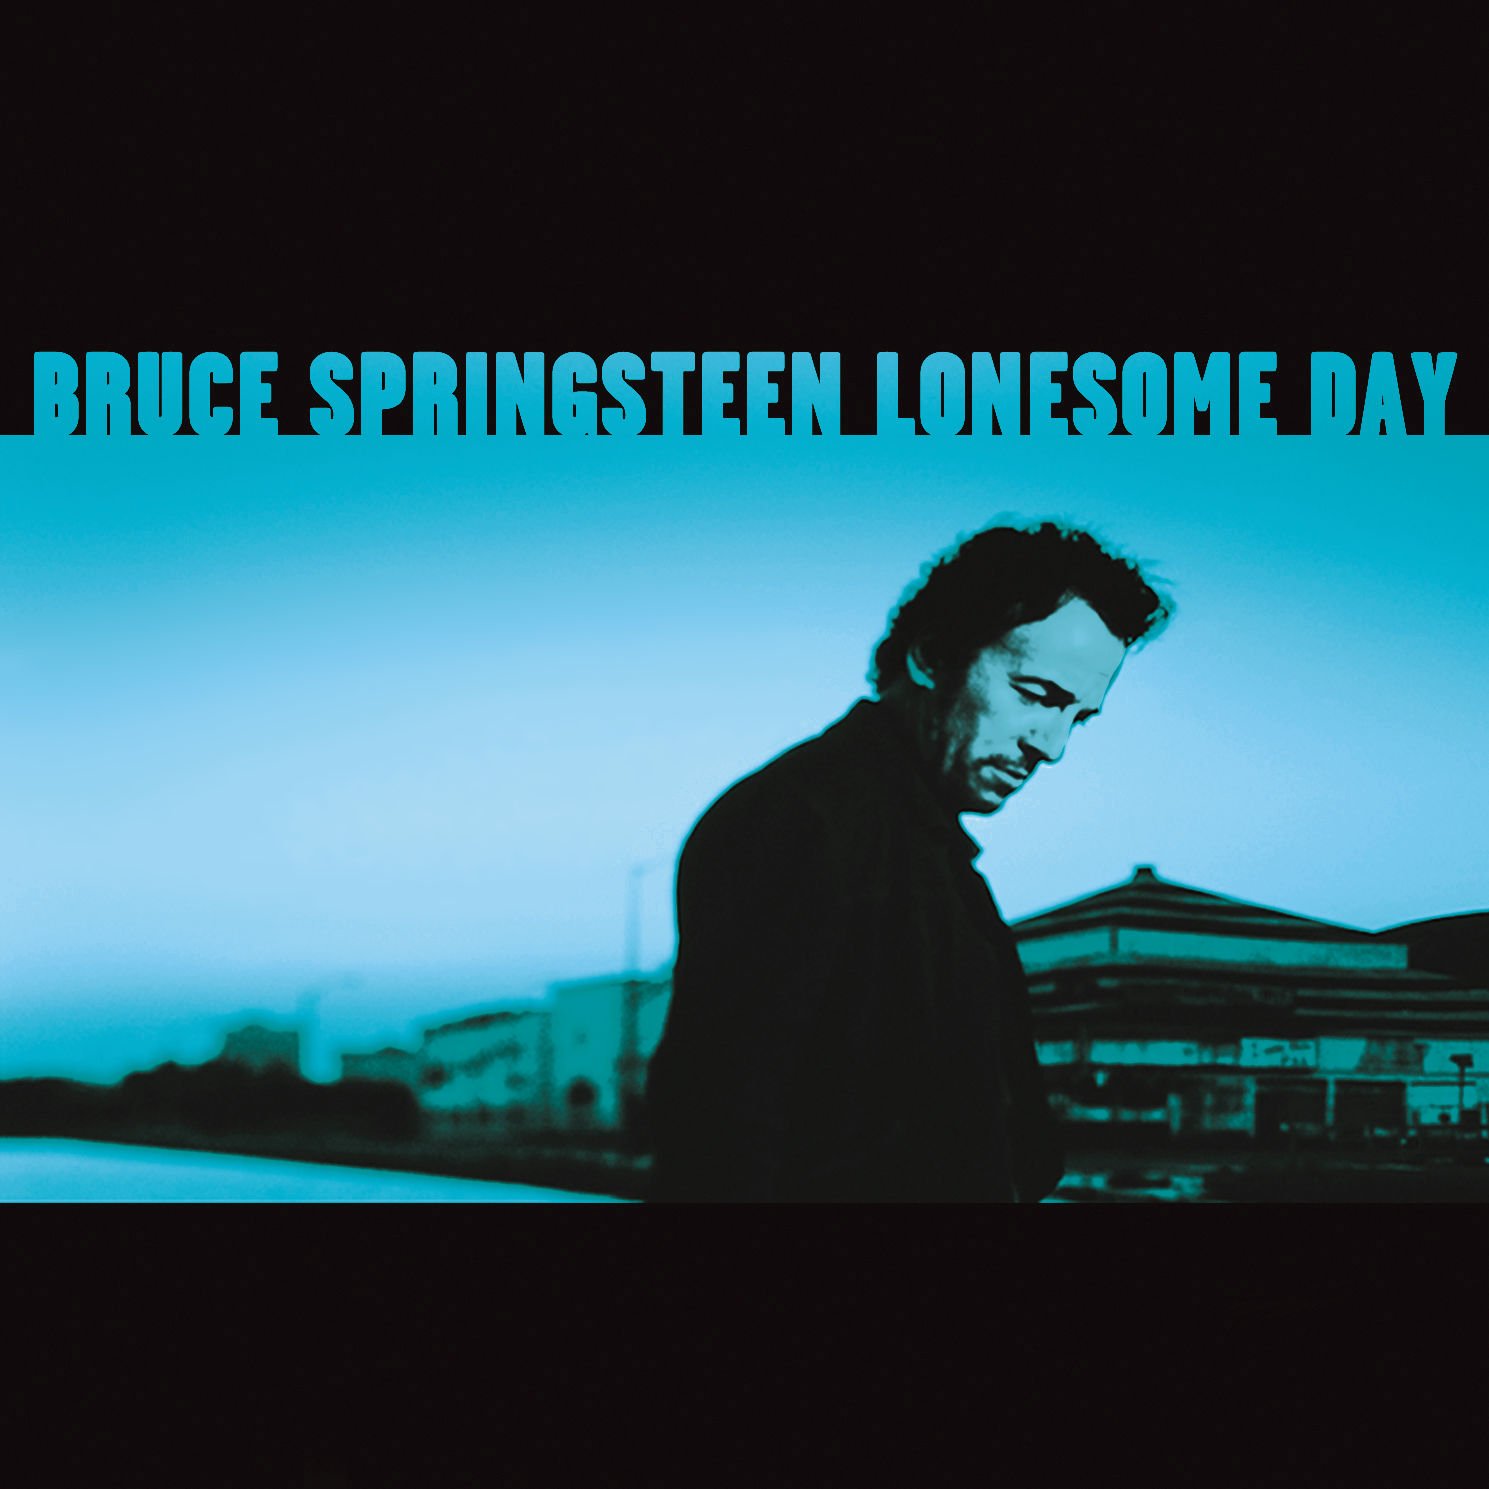 Bruce Springsteen - Lonesome Day (2018) 24bit FLAC Download